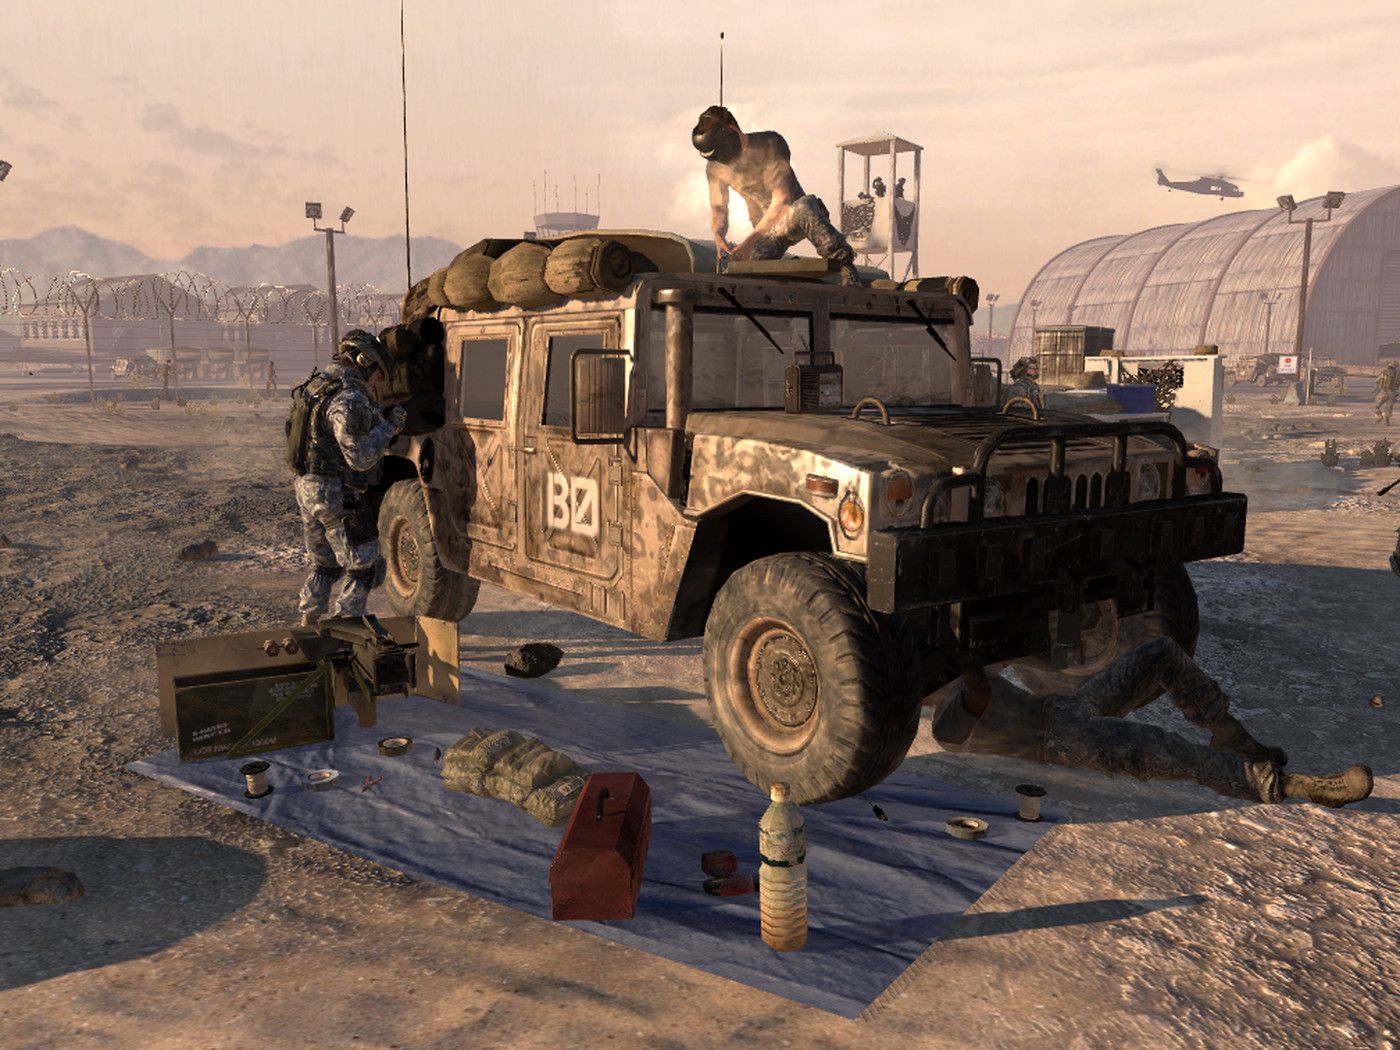 Call of Duty may use Humvees without maker's permission, judge